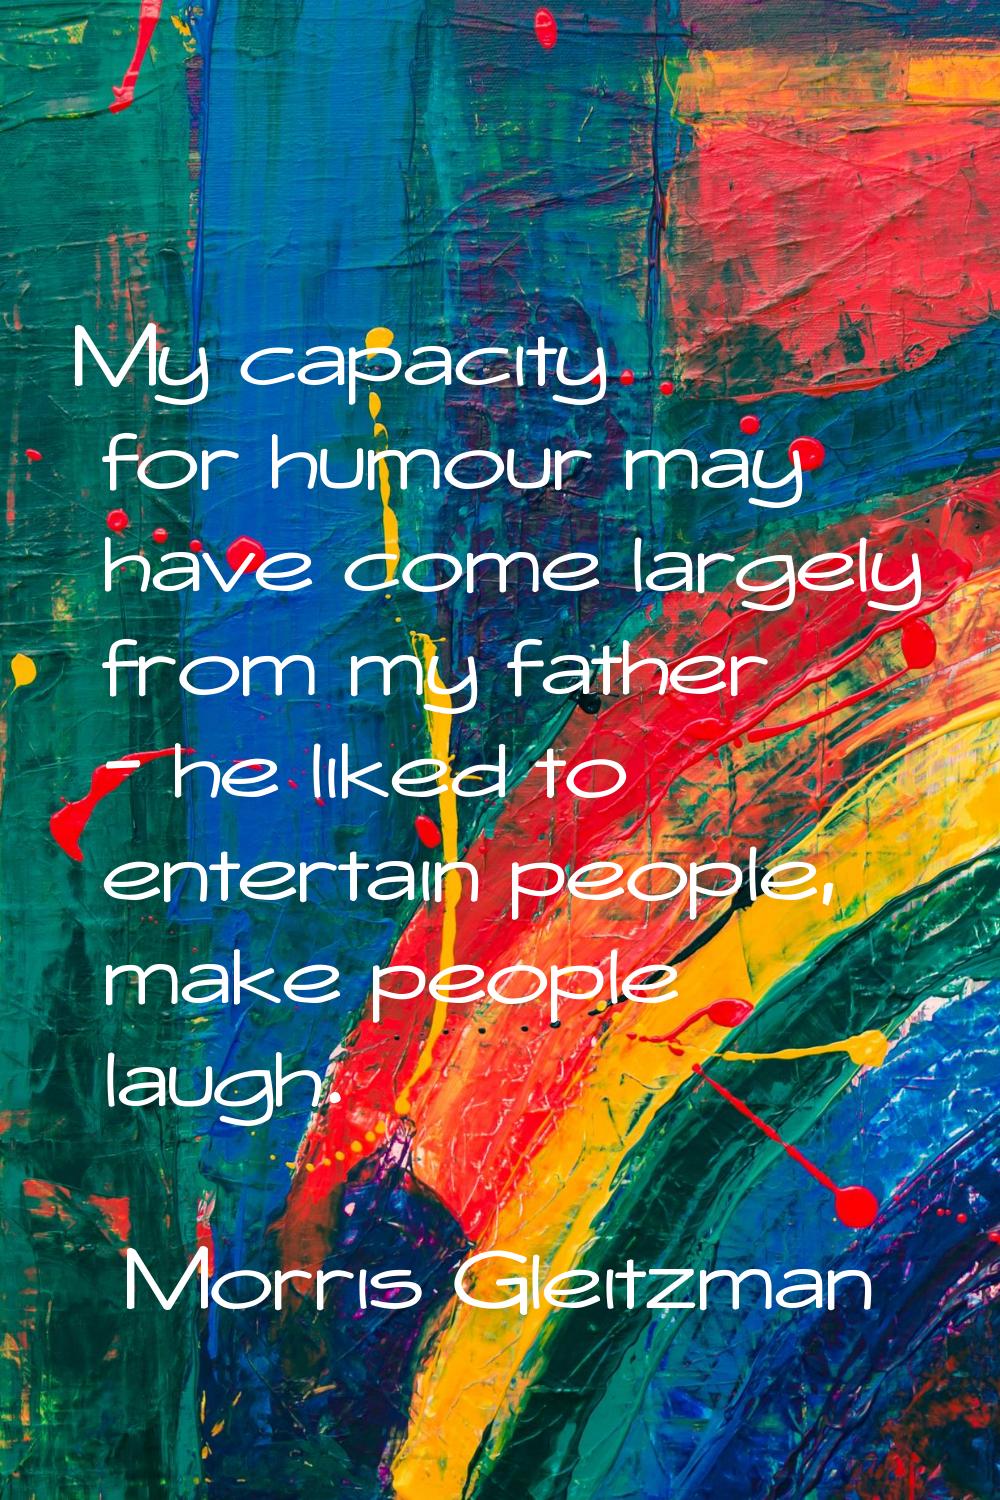 My capacity for humour may have come largely from my father - he liked to entertain people, make pe